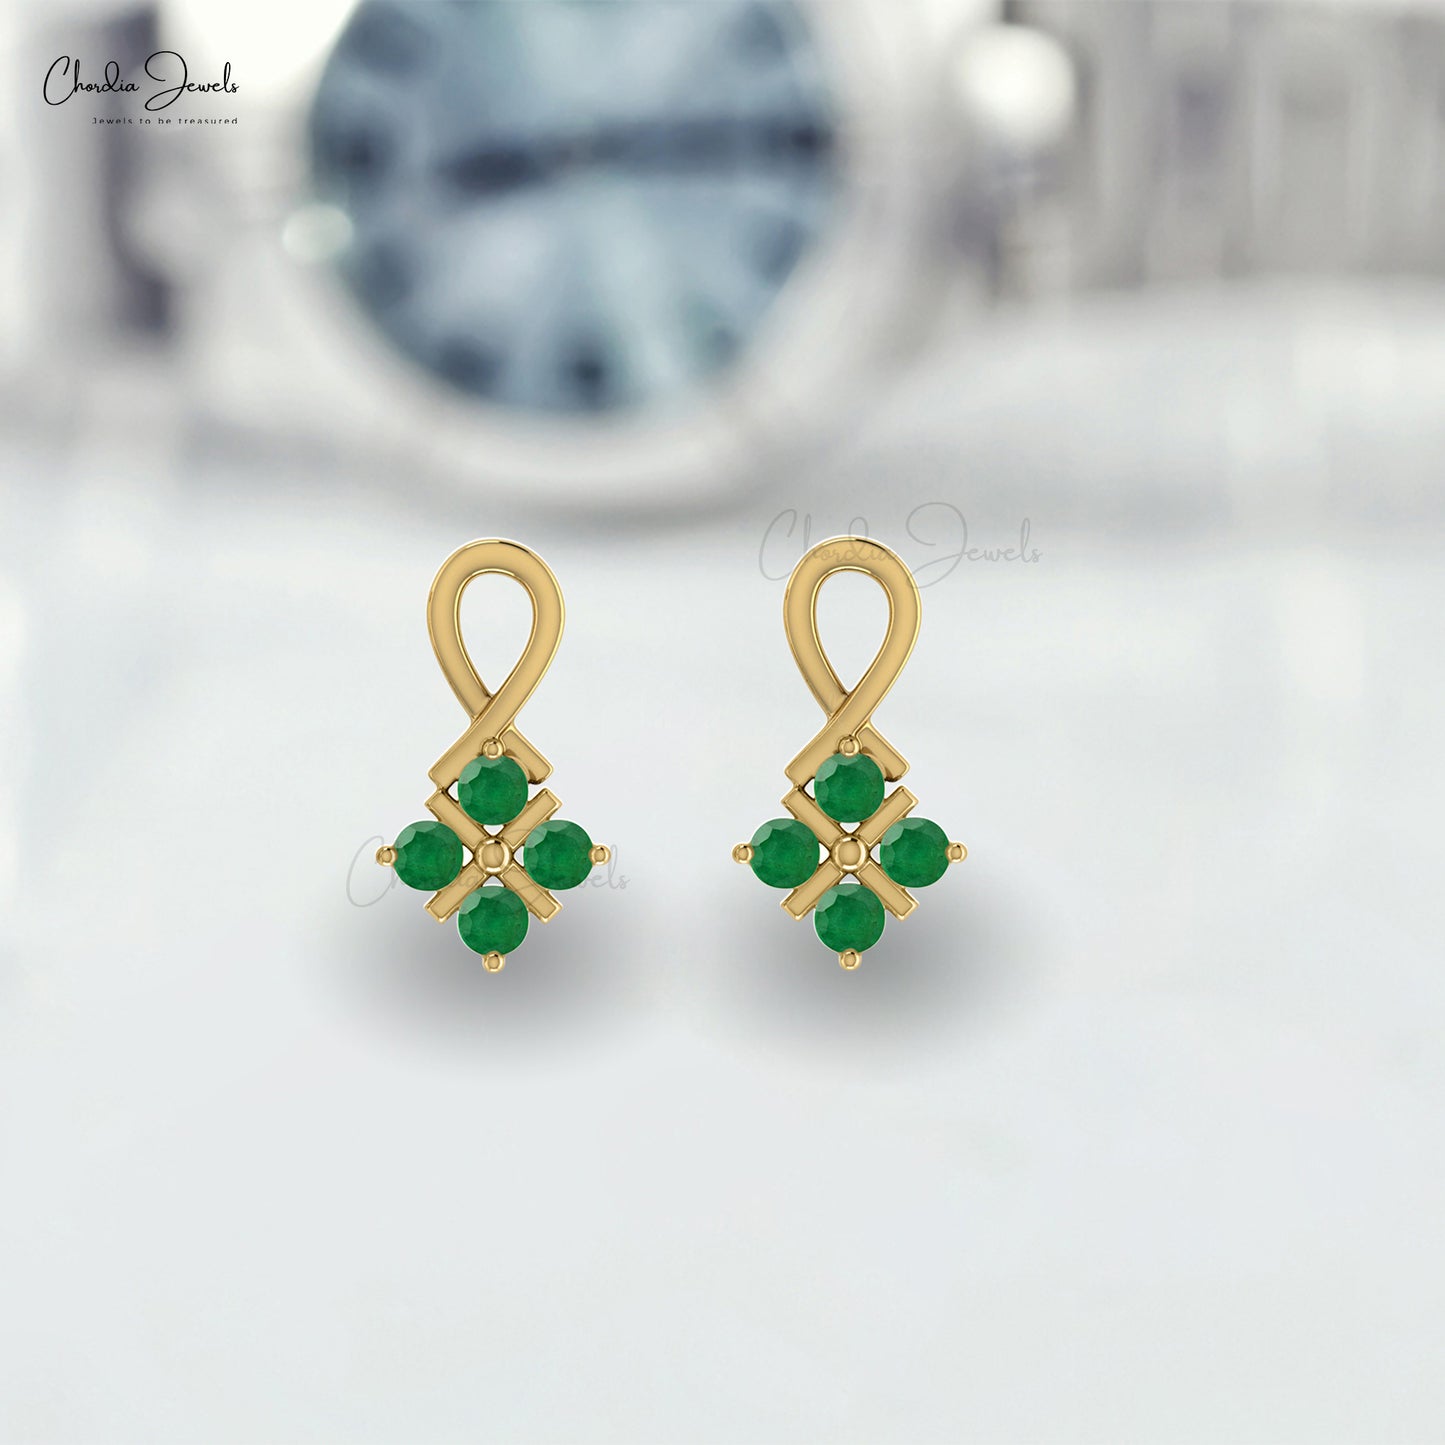 Wrap yourself in the embrace of beauty with these green emerald earrings.